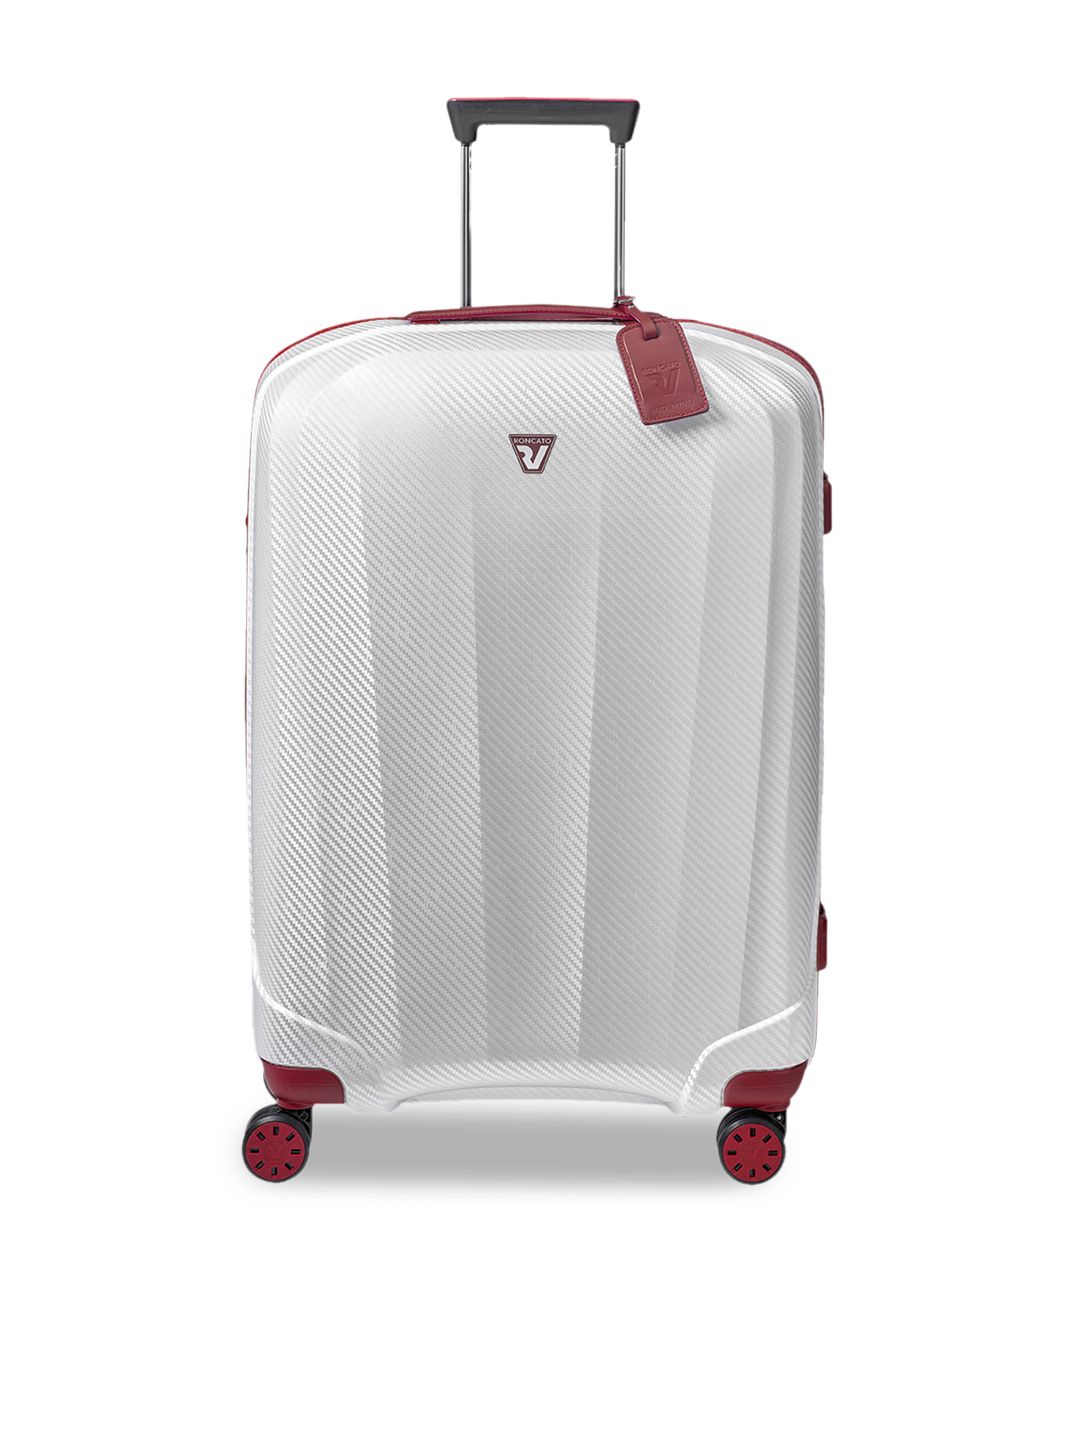 RONCATO WE ARE GLAM Range Rosso & Bianco Color Hard Large Luggage Price in India